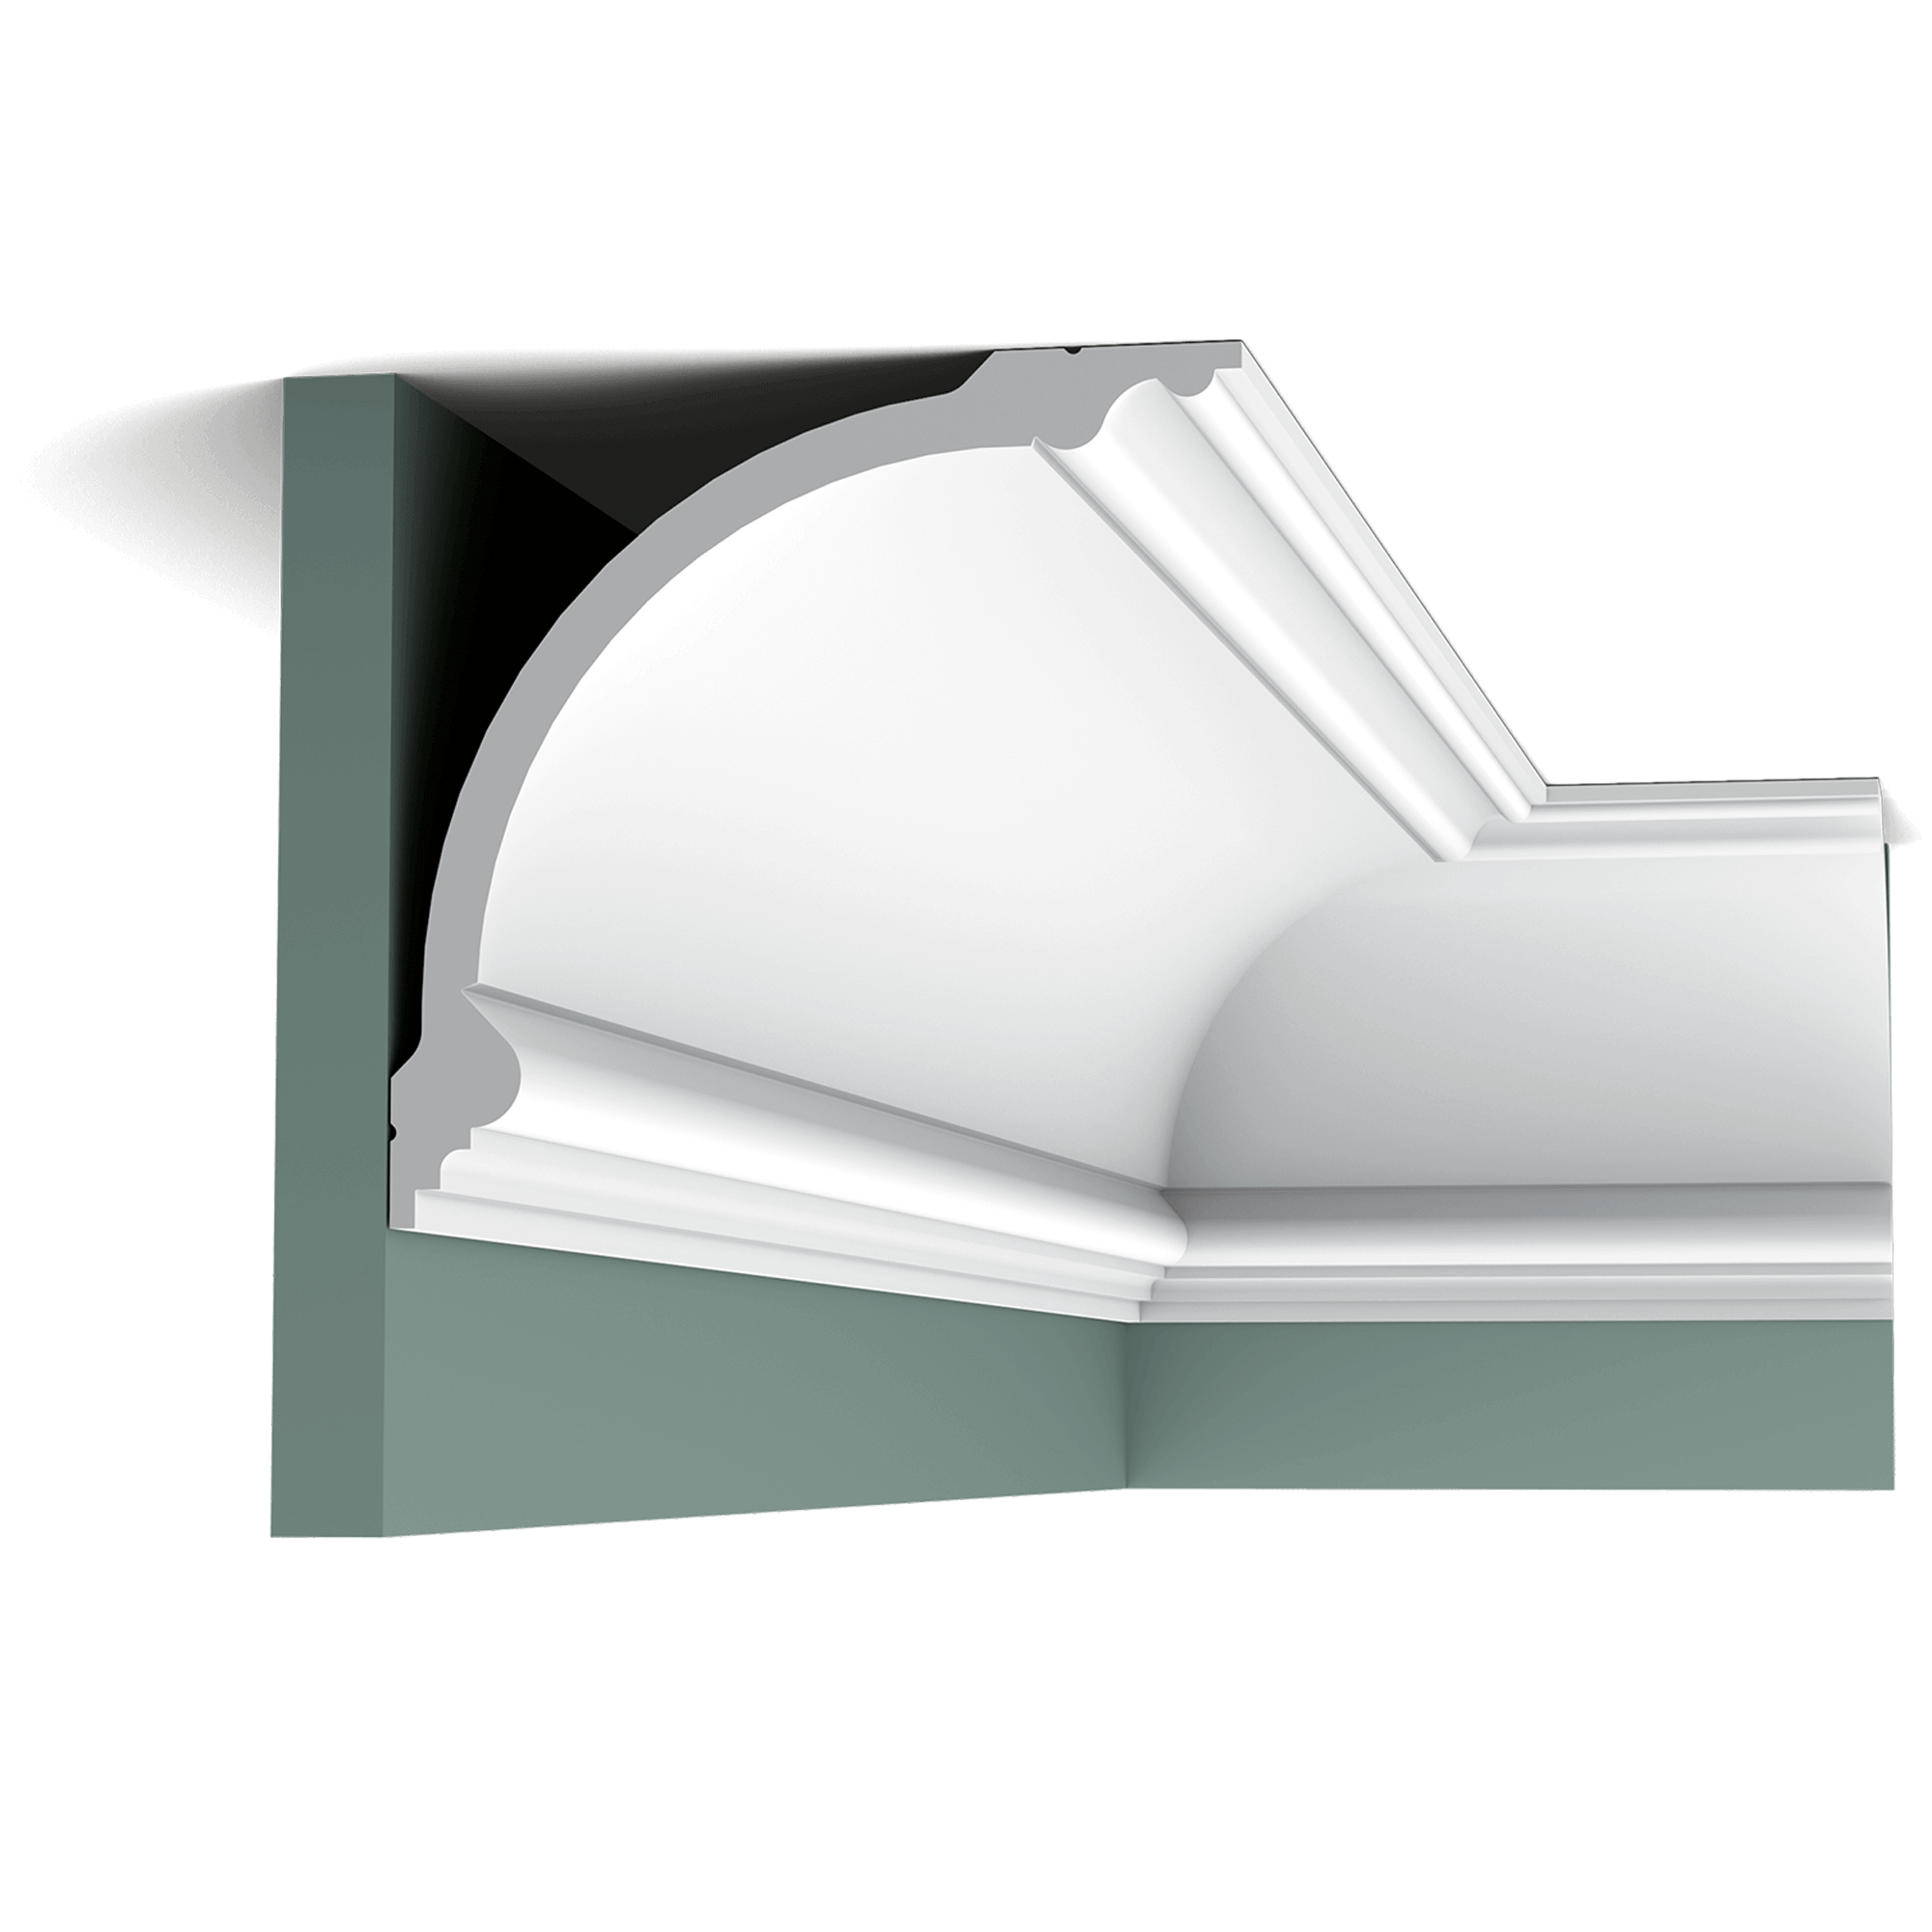 c338 cornice moulding a298 This, the largest Canterbury model, is stately and symmetrical, with the same linear design above and below. This model is often combined with C338A or B cornice mouldings and the P3020(A) panel moulding. Installation remark: It is necessary to screw this profile on the wall.